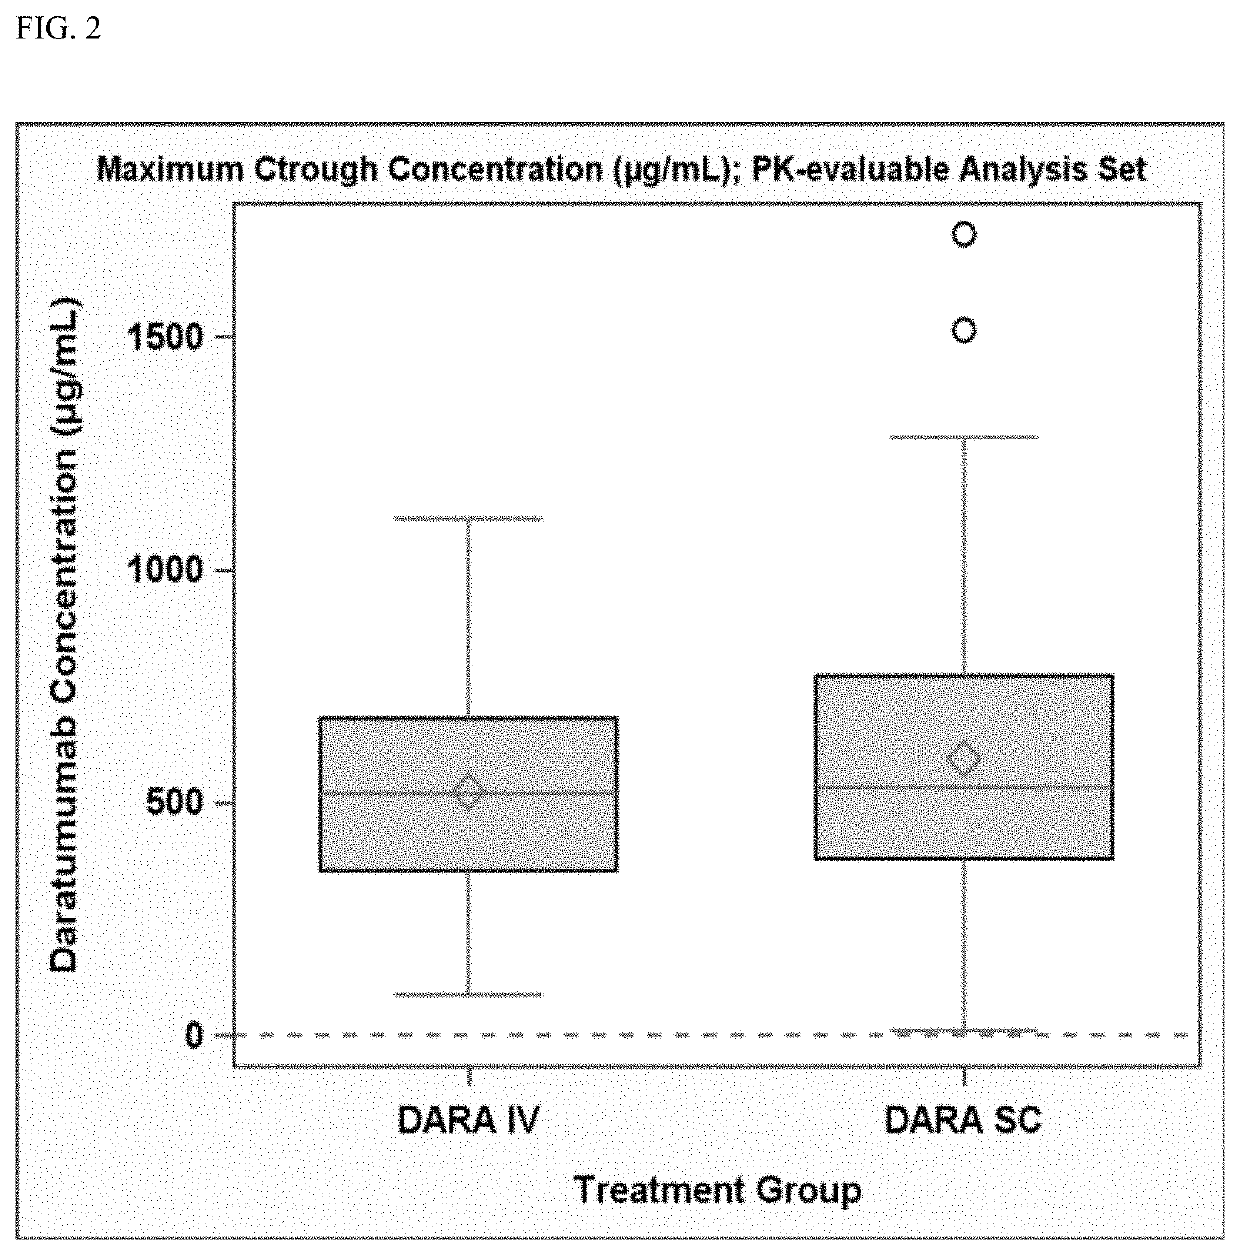 Clinically Proven Subcutaneous Pharmaceutical Compositions Comprising Anti-CD38 Antibodies and Their Uses in Combination with Bortezomib and Dexamethasone